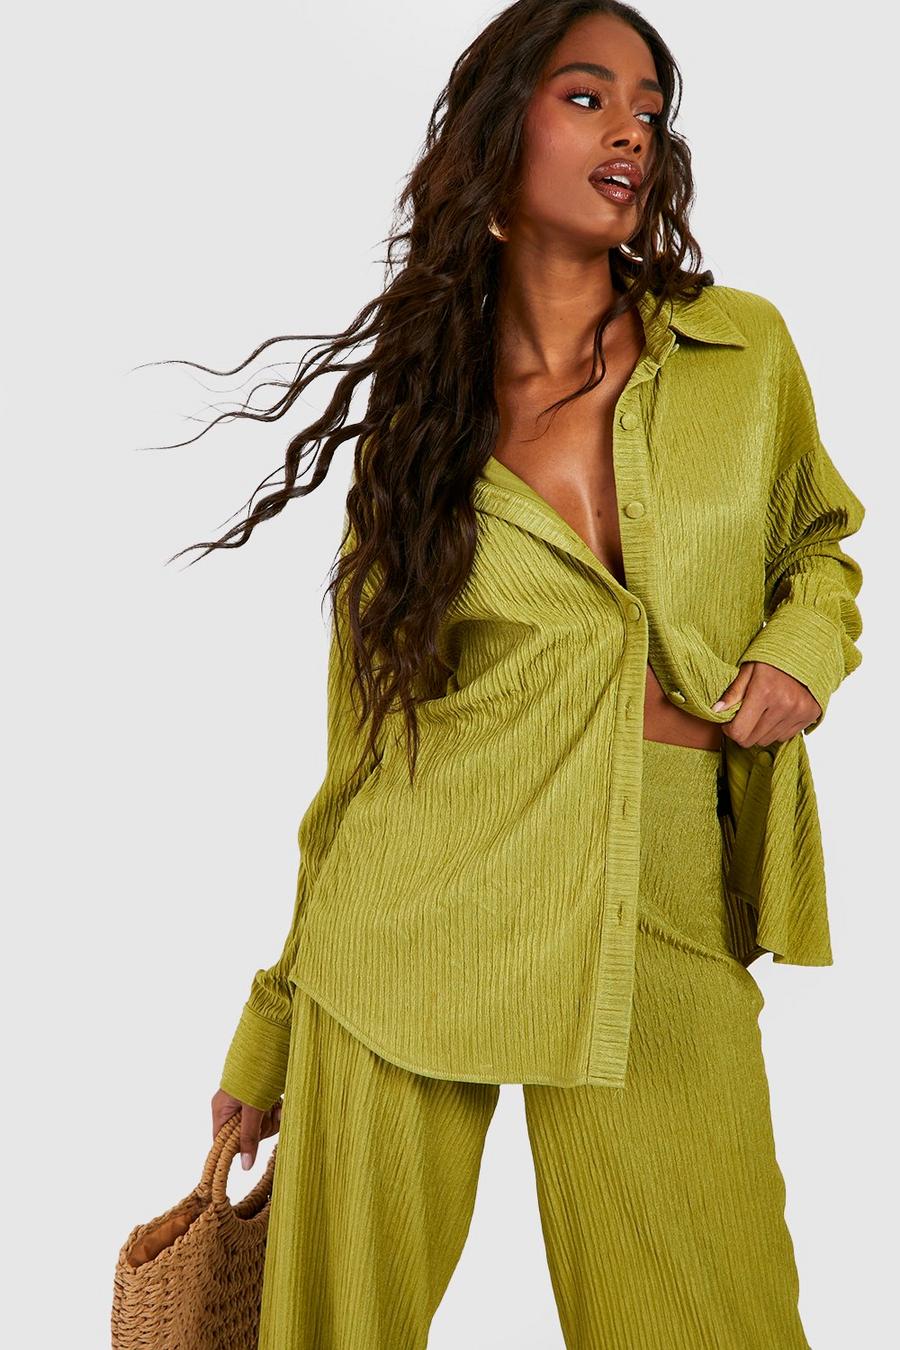 Khaki Crinkle Relaxed Fit Shirt